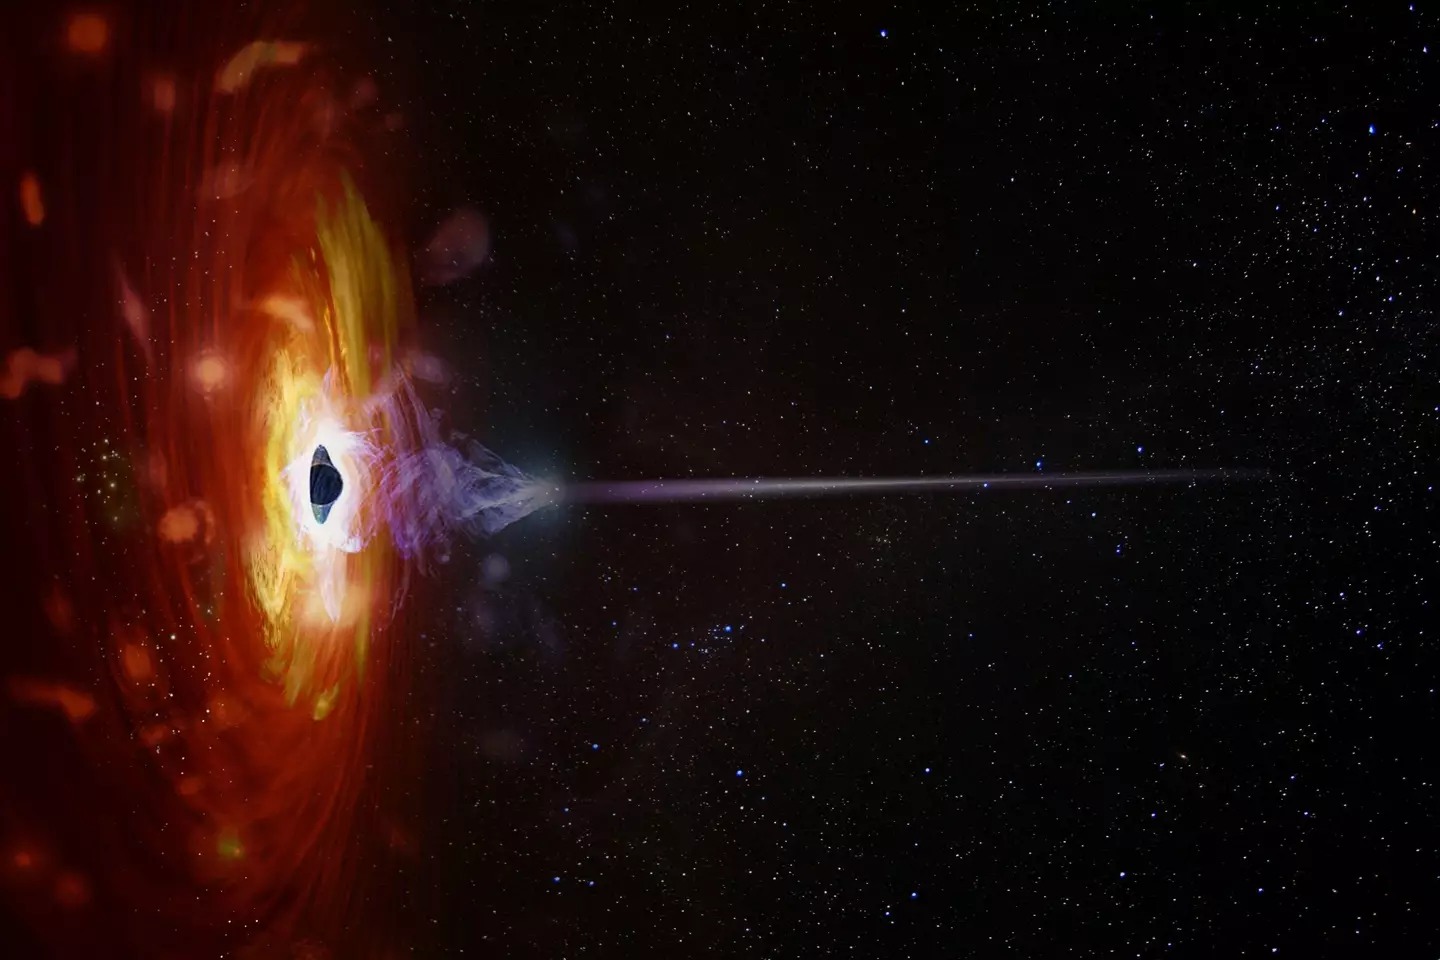 Scientists believe they've spotted a huge black hole hurtling through space.